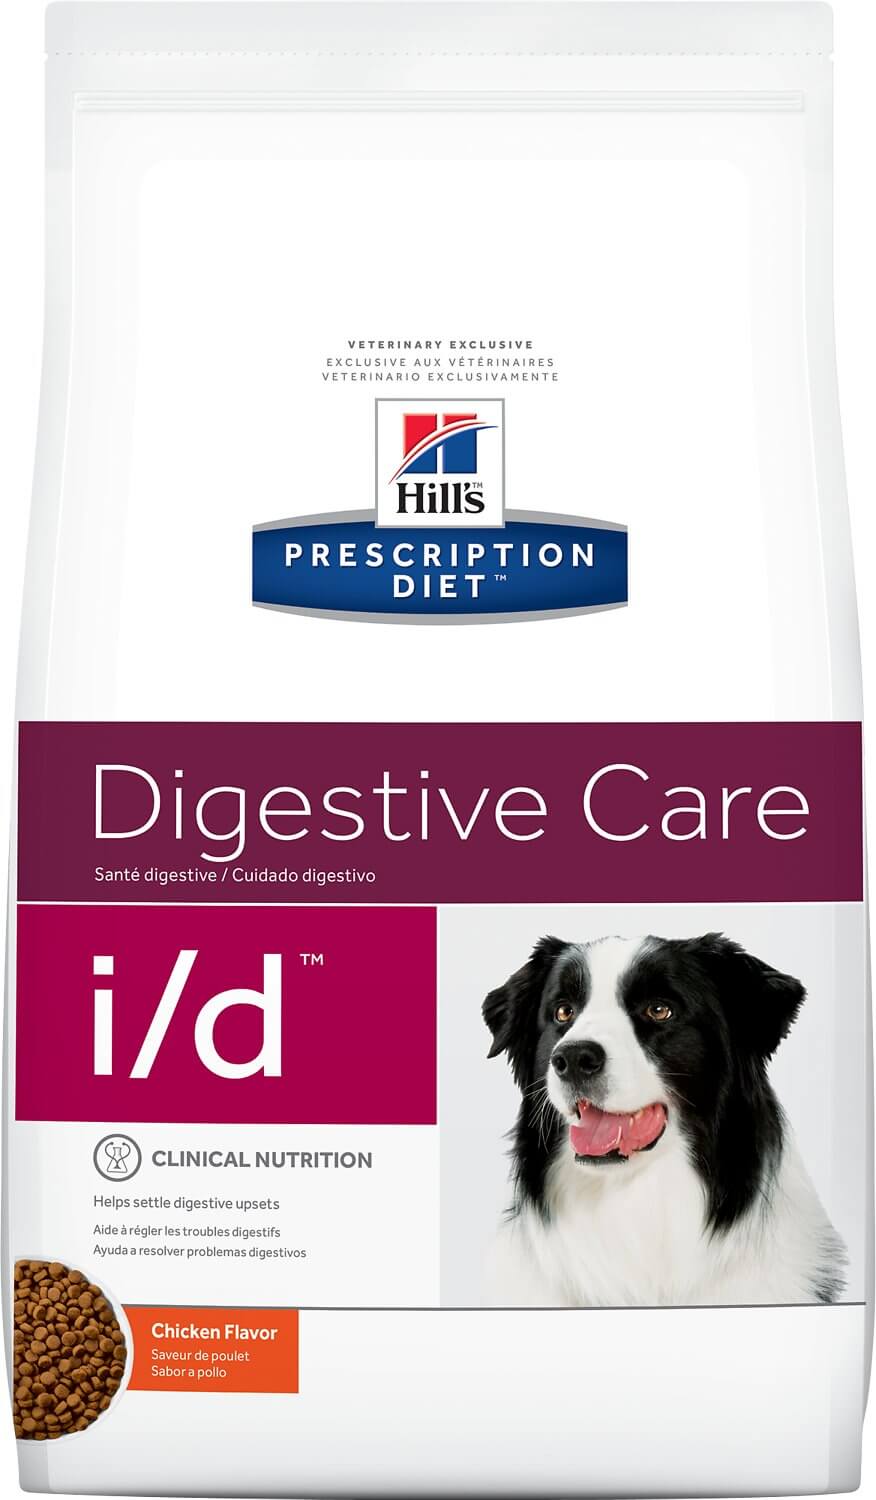 Hill’s Prescription Diet Digestive Care I/D Canine Dog Food Review (Dry)